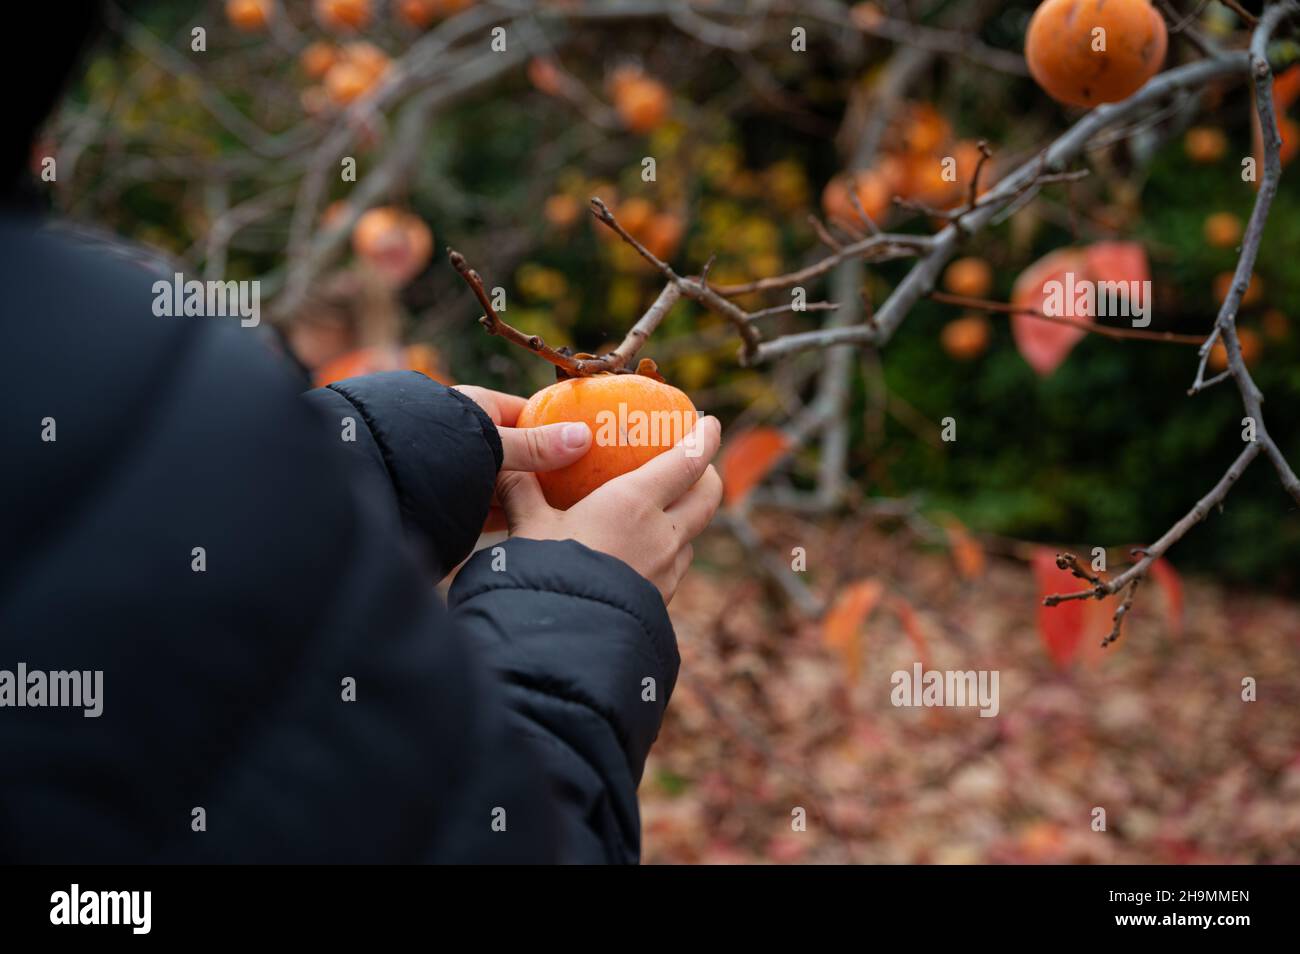 Child picking a ripe persimmon fruit from a tree in an autumn nature. Stock Photo